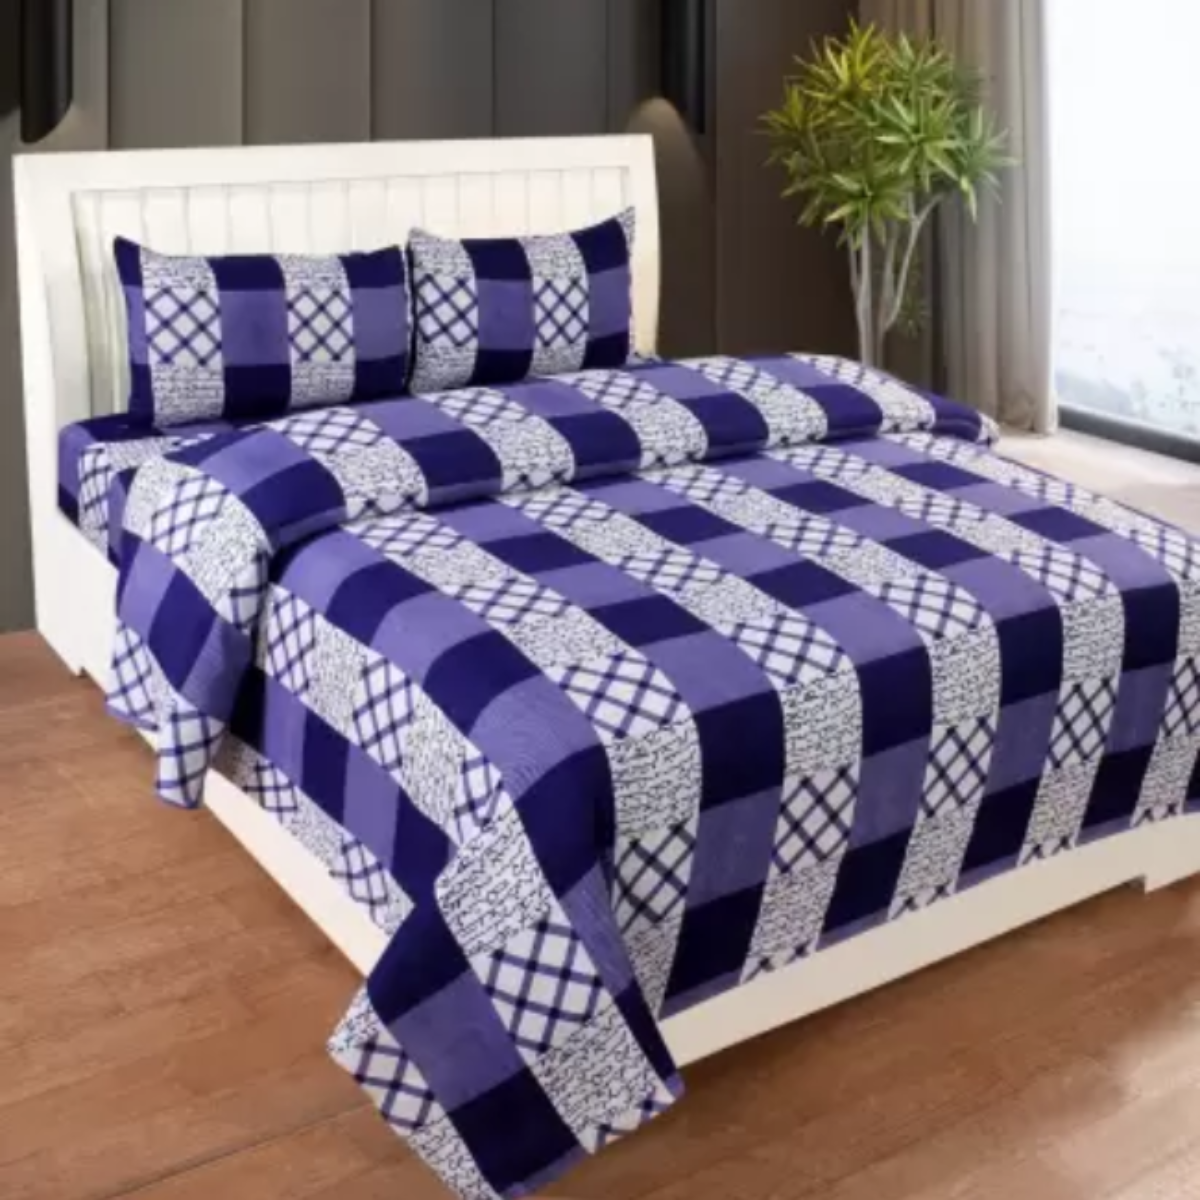 SPRINGSTONE POLYCOTTON DOUBLE PRINTED FLAT BEDSHEET ARTICLE NO HFDBSSD7M